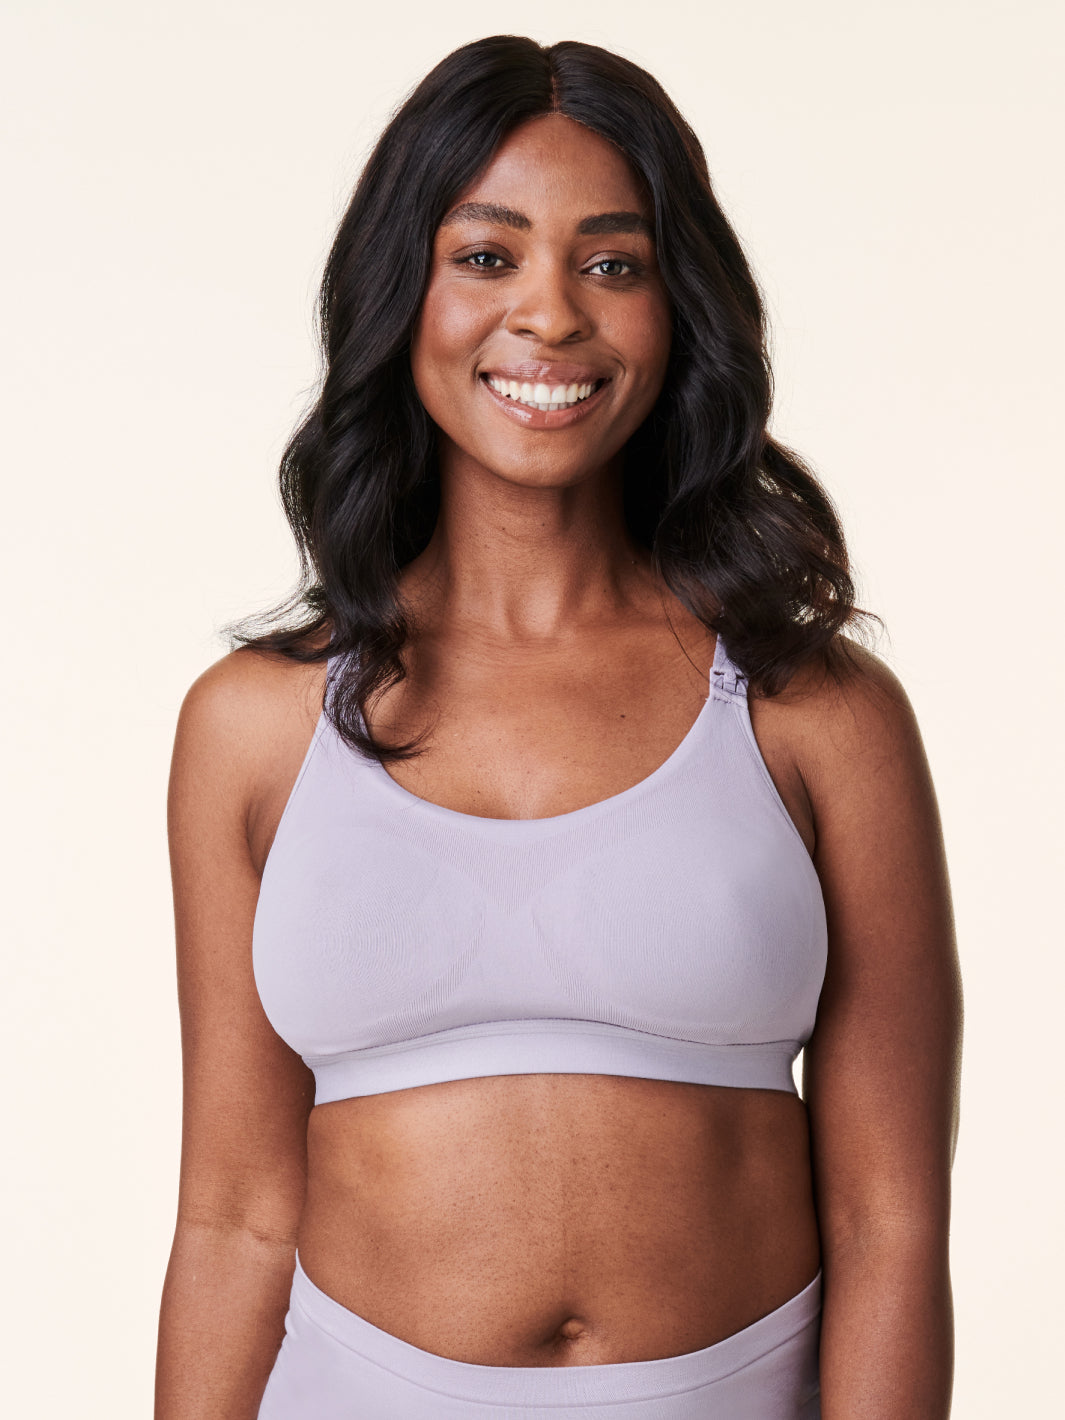 Forever 21 Women's Seamless Perforated Sports Bra in Black Small